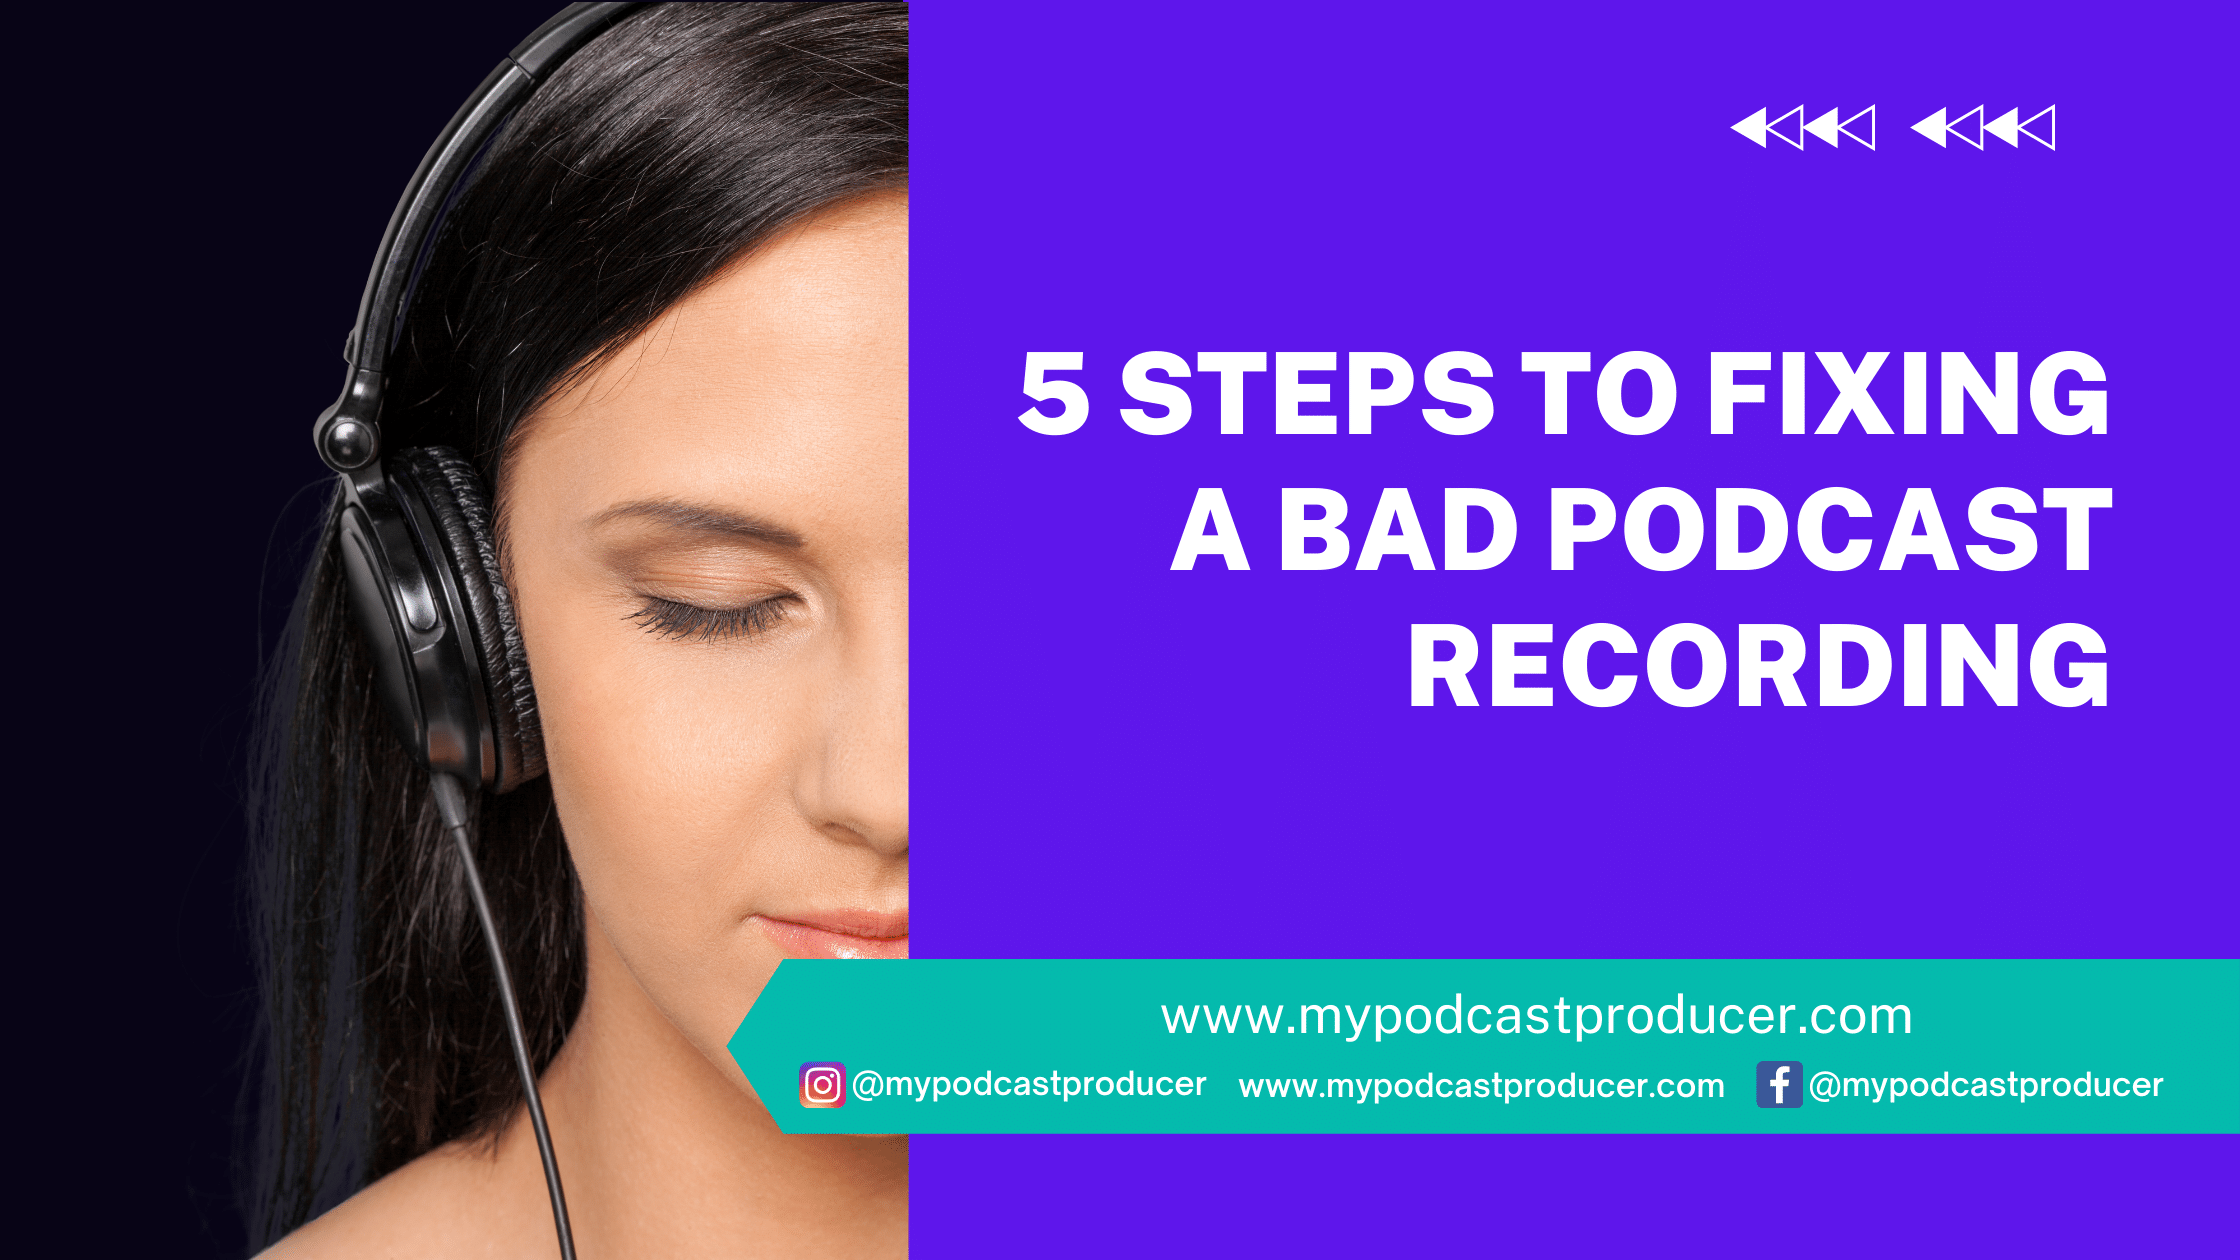 5 Steps to Fixing a Bad Podcast Recording